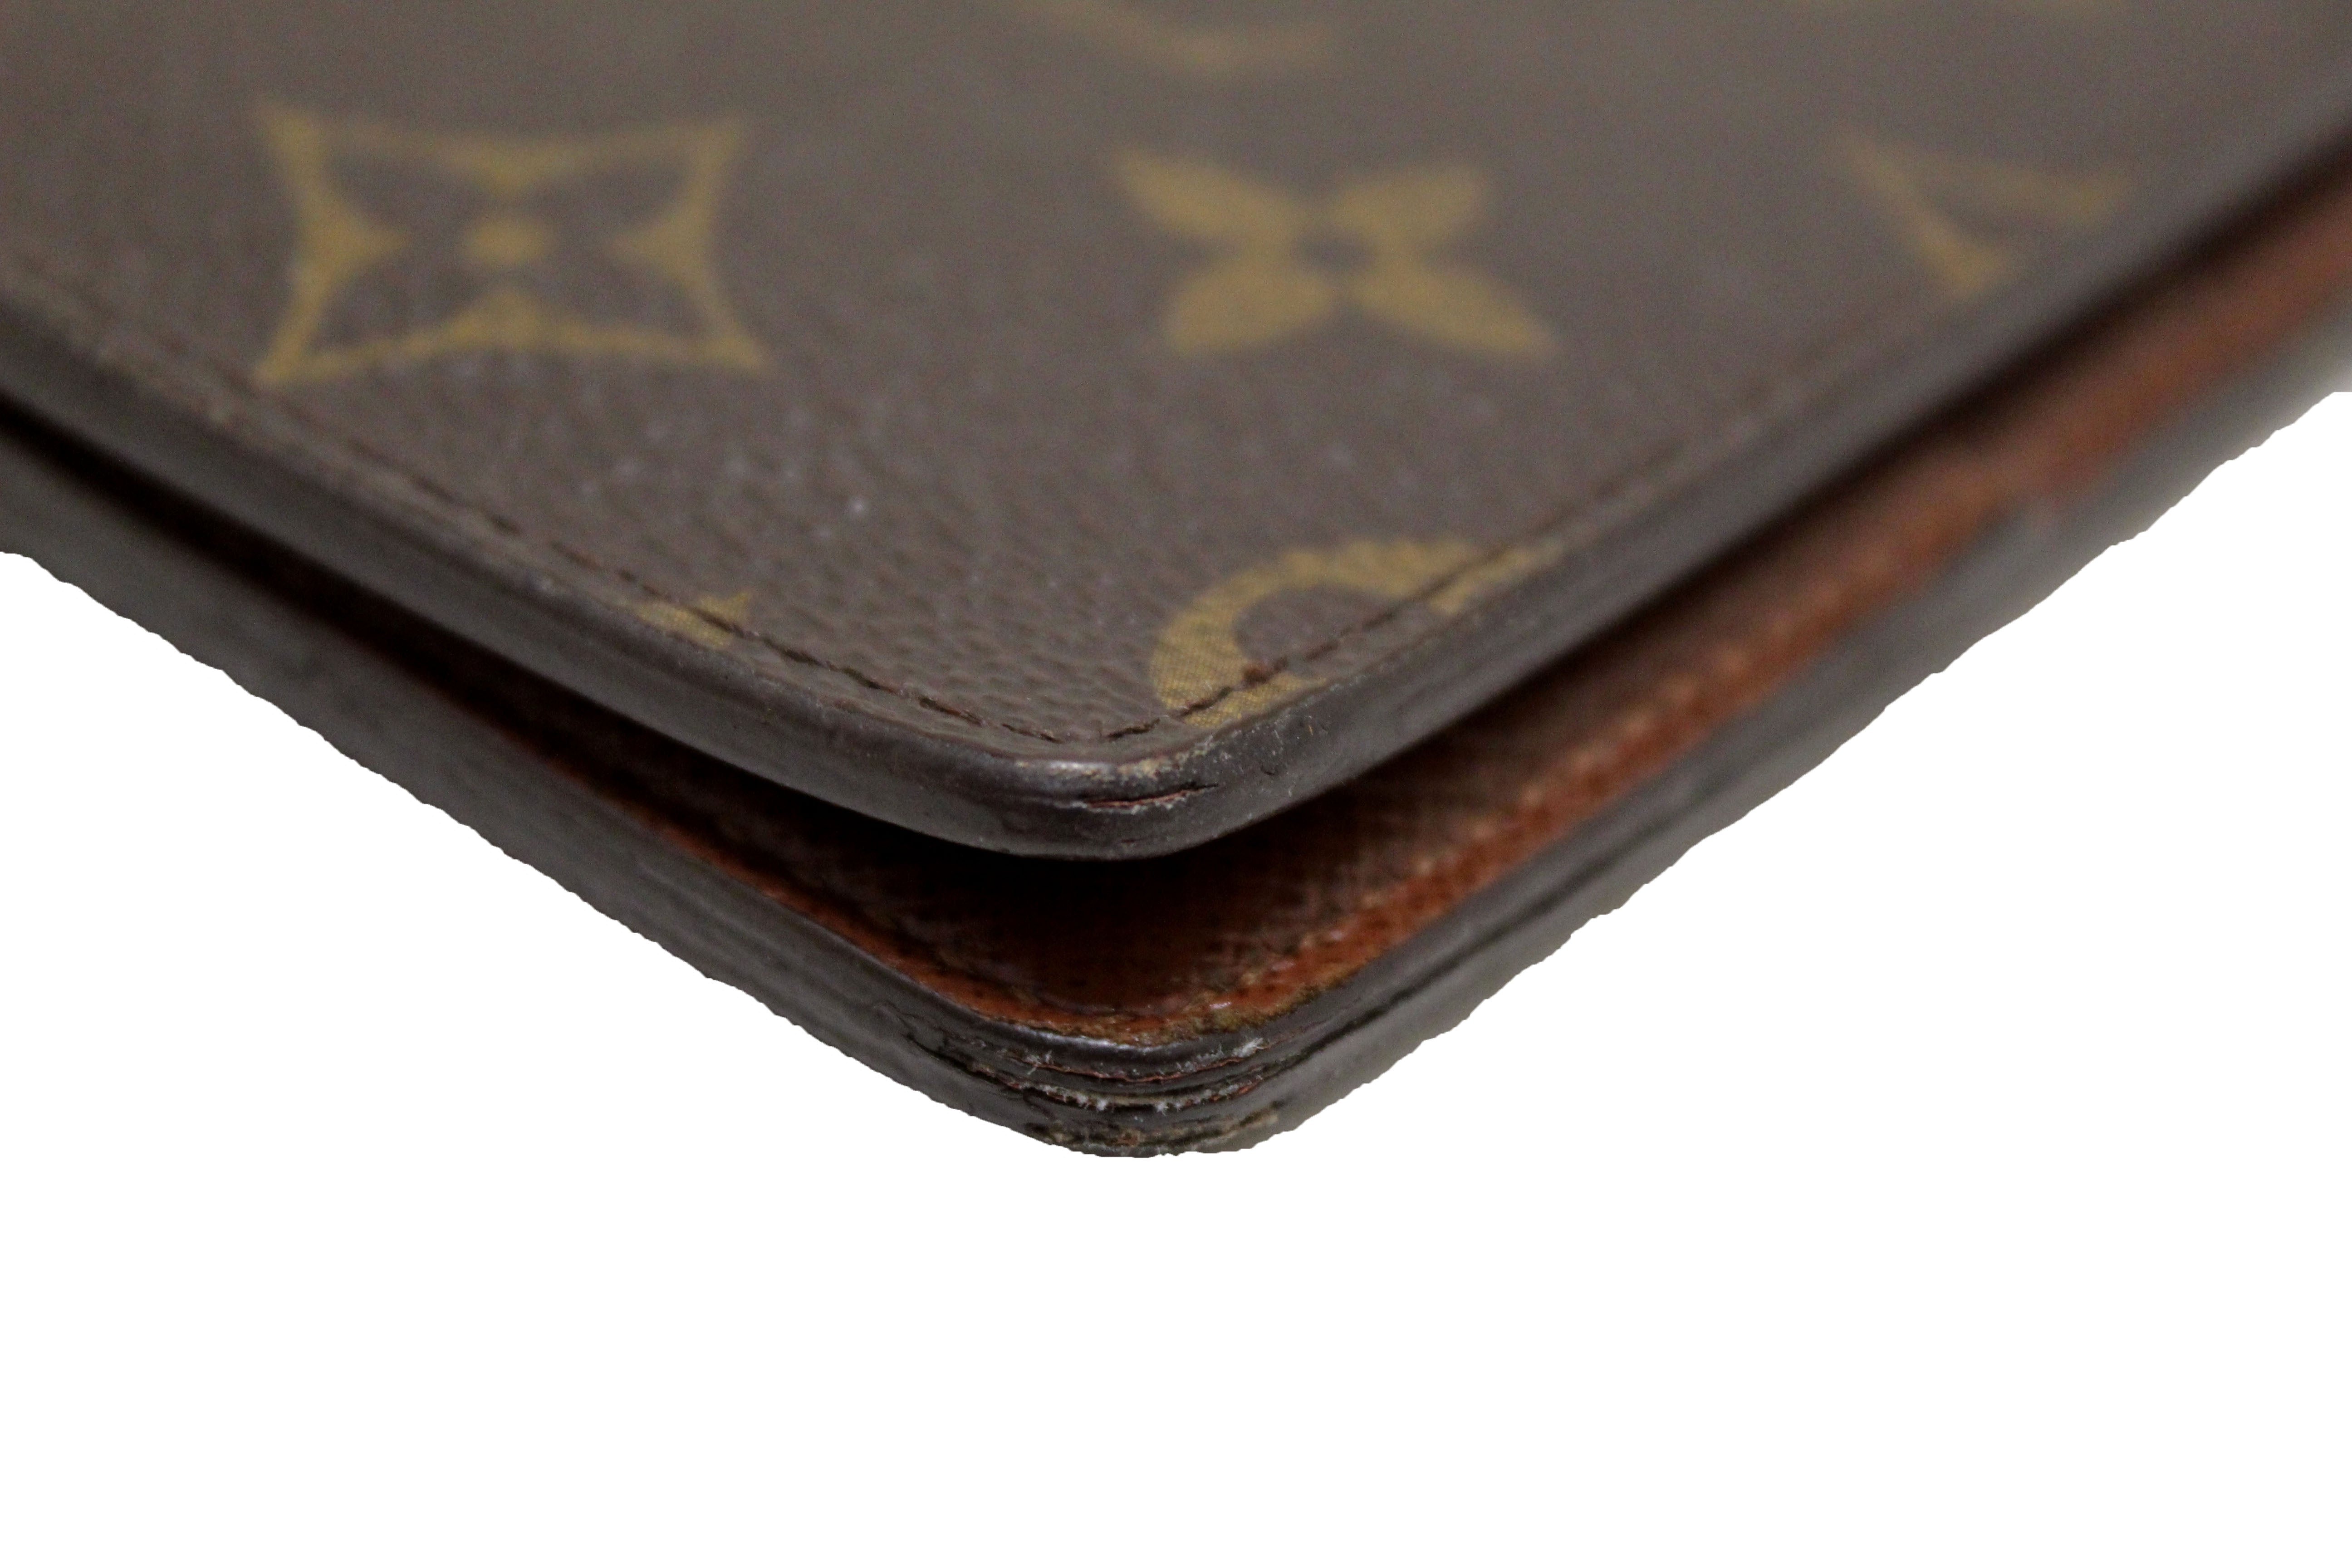 Louis Vuitton x NBA Pocket Organizer Monogram Embossed Leather - ShopStyle  Wallets & Card Holders